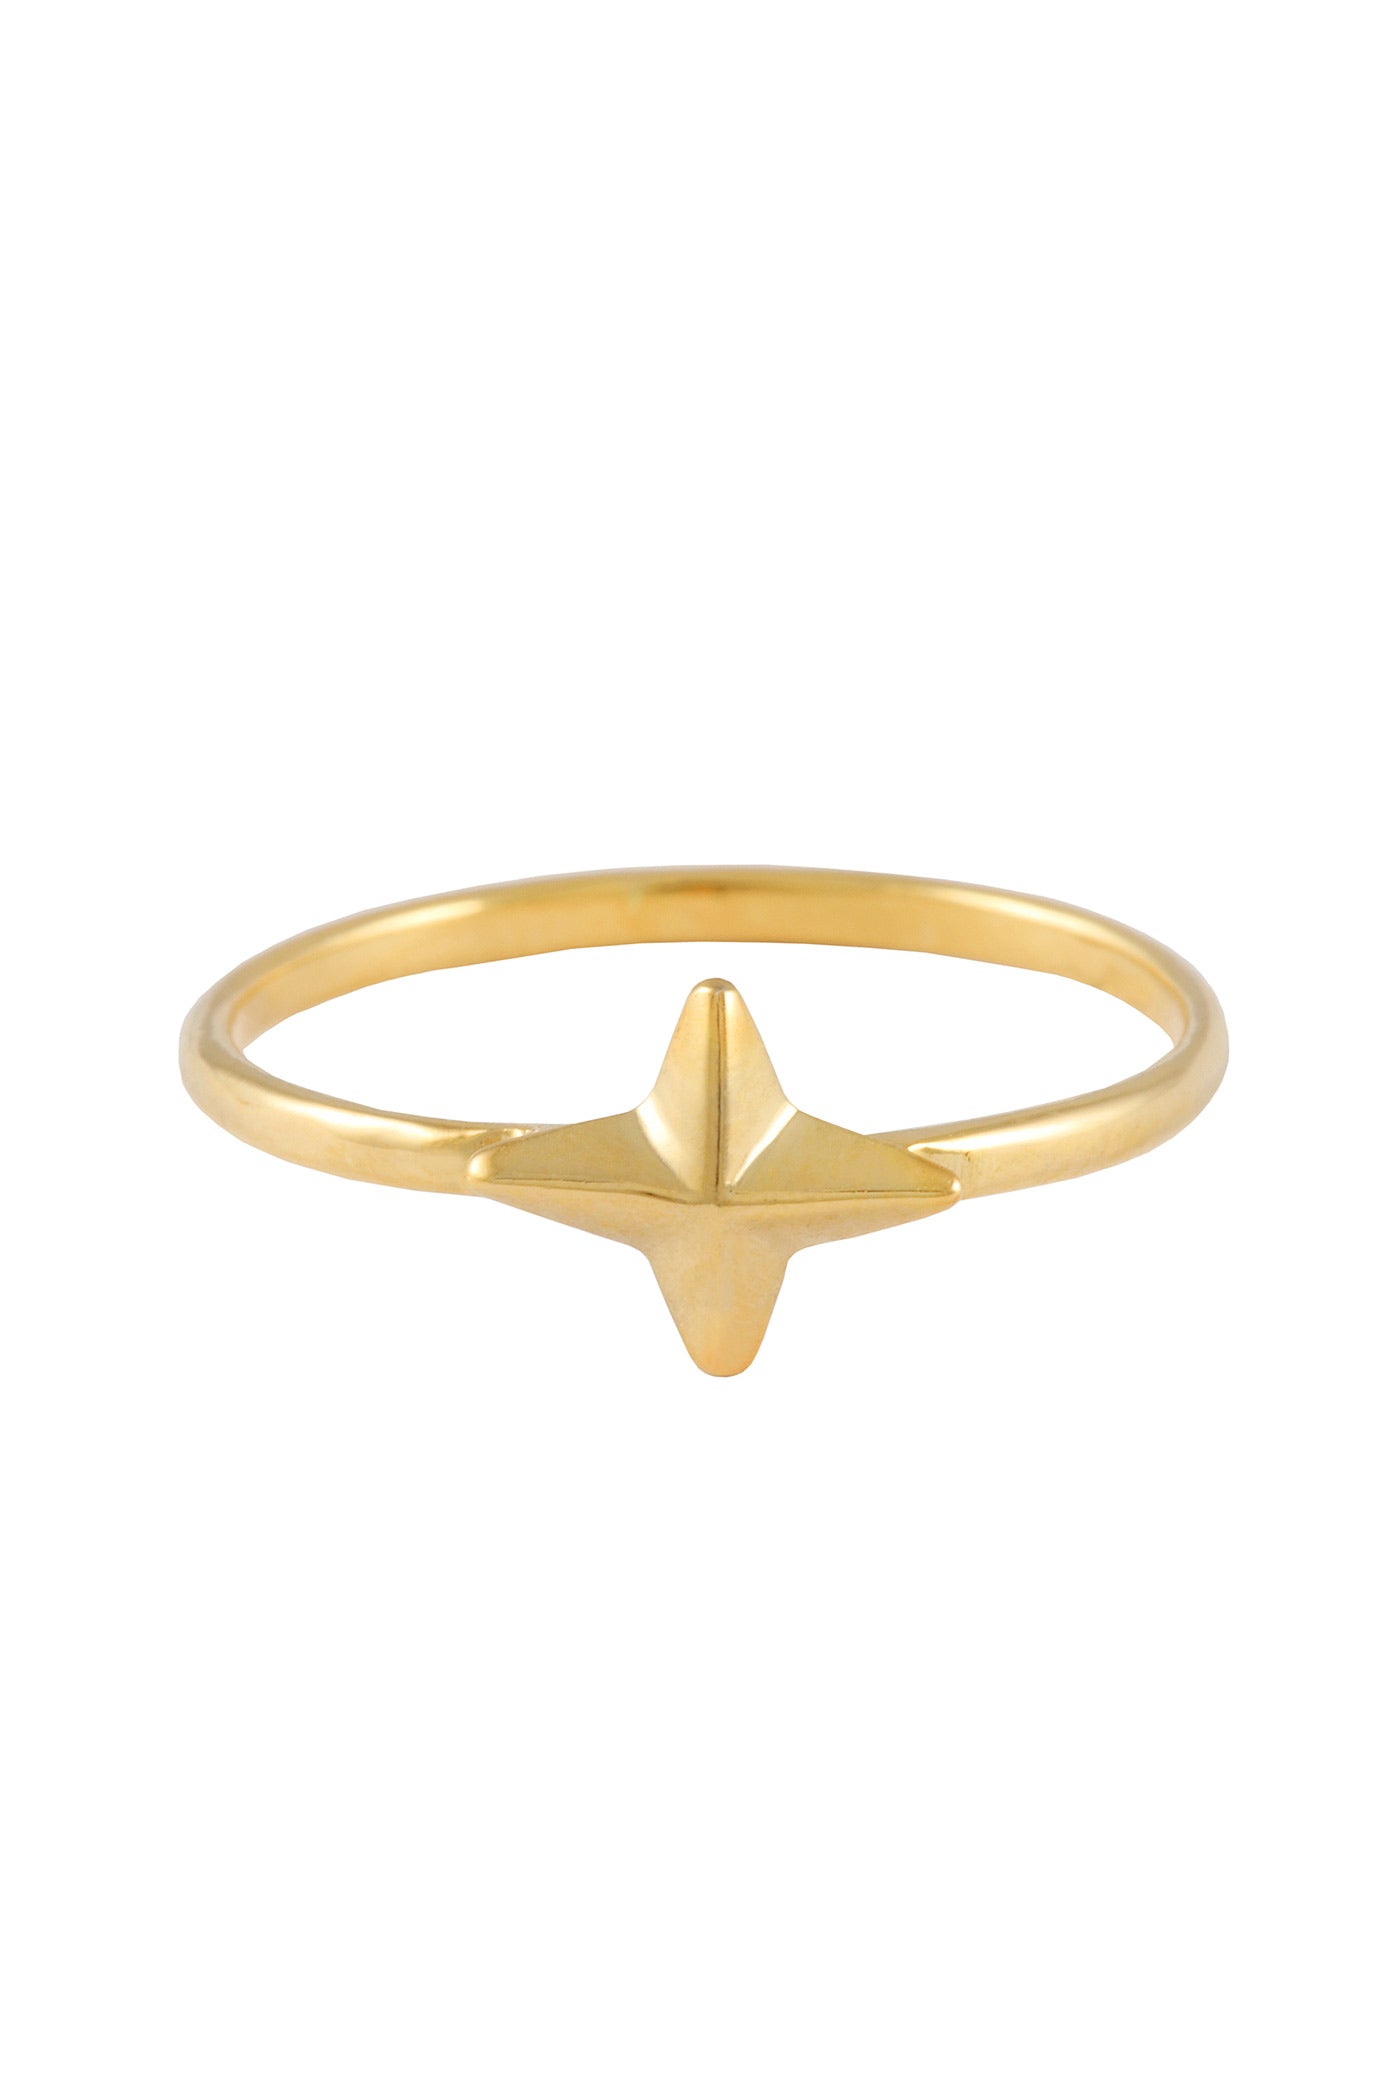 Four pointed star ring. Silver, gold plated